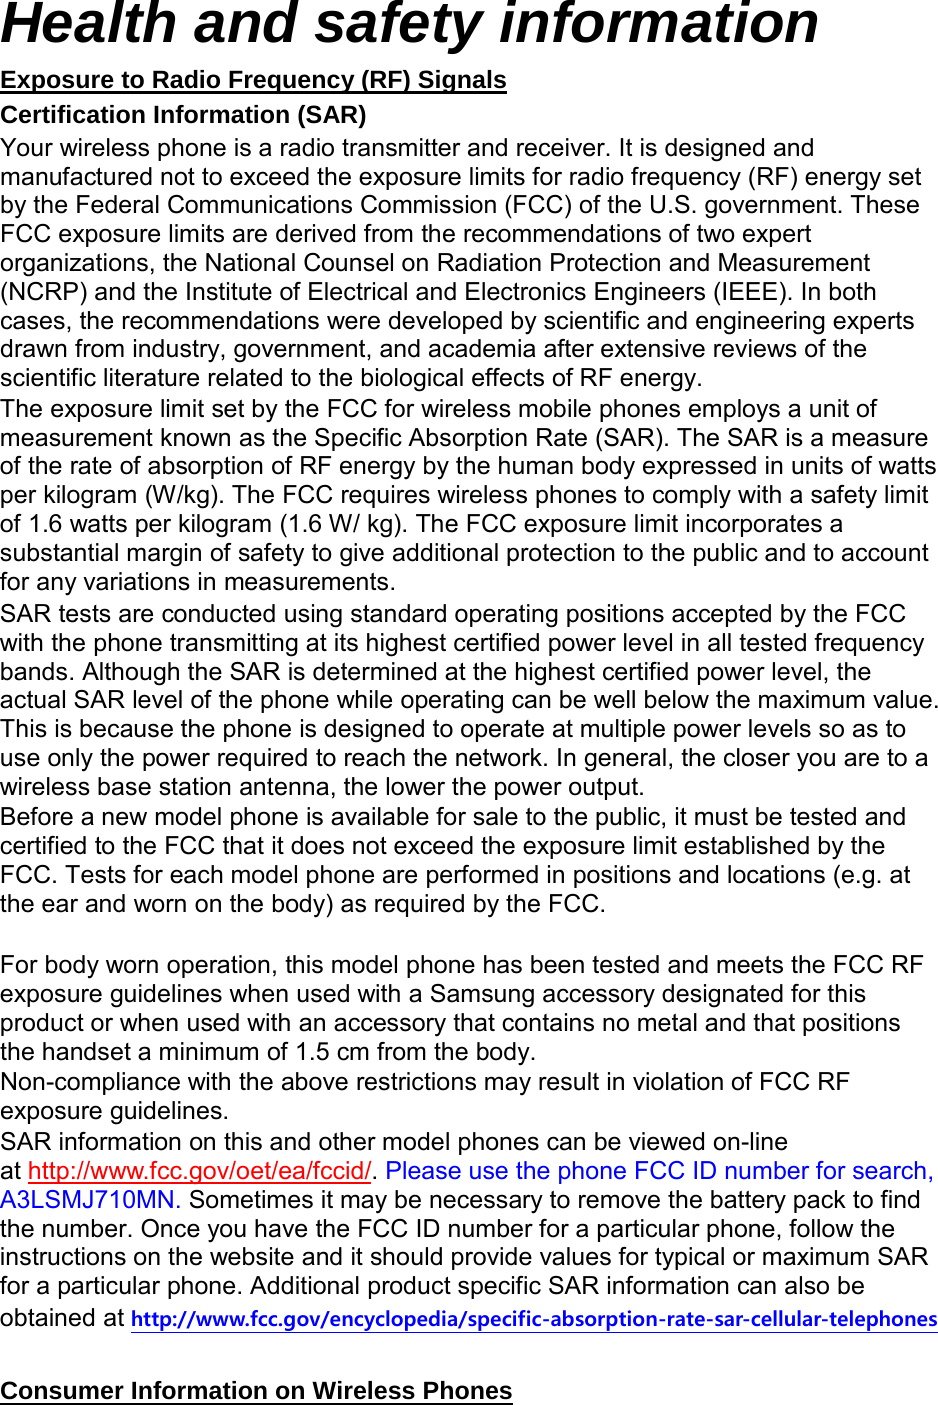 Health and safety information Certification Information (SAR) Exposure to Radio Frequency (RF) Signals Your wireless phone is a radio transmitter and receiver. It is designed and manufactured not to exceed the exposure limits for radio frequency (RF) energy set by the Federal Communications Commission (FCC) of the U.S. government. These FCC exposure limits are derived from the recommendations of two expert organizations, the National Counsel on Radiation Protection and Measurement (NCRP) and the Institute of Electrical and Electronics Engineers (IEEE). In both cases, the recommendations were developed by scientific and engineering experts drawn from industry, government, and academia after extensive reviews of the scientific literature related to the biological effects of RF energy. The exposure limit set by the FCC for wireless mobile phones employs a unit of measurement known as the Specific Absorption Rate (SAR). The SAR is a measure of the rate of absorption of RF energy by the human body expressed in units of watts per kilogram (W/kg). The FCC requires wireless phones to comply with a safety limit of 1.6 watts per kilogram (1.6 W/ kg). The FCC exposure limit incorporates a substantial margin of safety to give additional protection to the public and to account for any variations in measurements. SAR tests are conducted using standard operating positions accepted by the FCC with the phone transmitting at its highest certified power level in all tested frequency bands. Although the SAR is determined at the highest certified power level, the actual SAR level of the phone while operating can be well below the maximum value. This is because the phone is designed to operate at multiple power levels so as to use only the power required to reach the network. In general, the closer you are to a wireless base station antenna, the lower the power output. Before a new model phone is available for sale to the public, it must be tested and certified to the FCC that it does not exceed the exposure limit established by the FCC. Tests for each model phone are performed in positions and locations (e.g. at the ear and worn on the body) as required by the FCC.      For body worn operation, this model phone has been tested and meets the FCC RF exposure guidelines when used with a Samsung accessory designated for this product or when used with an accessory that contains no metal and that positions the handset a minimum of 1.5 cm from the body.   Non-compliance with the above restrictions may result in violation of FCC RF exposure guidelines. SAR information on this and other model phones can be viewed on-line at http://www.fcc.gov/oet/ea/fccid/. Please use the phone FCC ID number for search, A3LSMJ710MN. Sometimes it may be necessary to remove the battery pack to find the number. Once you have the FCC ID number for a particular phone, follow the instructions on the website and it should provide values for typical or maximum SAR for a particular phone. Additional product specific SAR information can also be obtained at http://www.fcc.gov/encyclopedia/specific-absorption-rate-sar-cellular-telephones  Consumer Information on Wireless Phones 